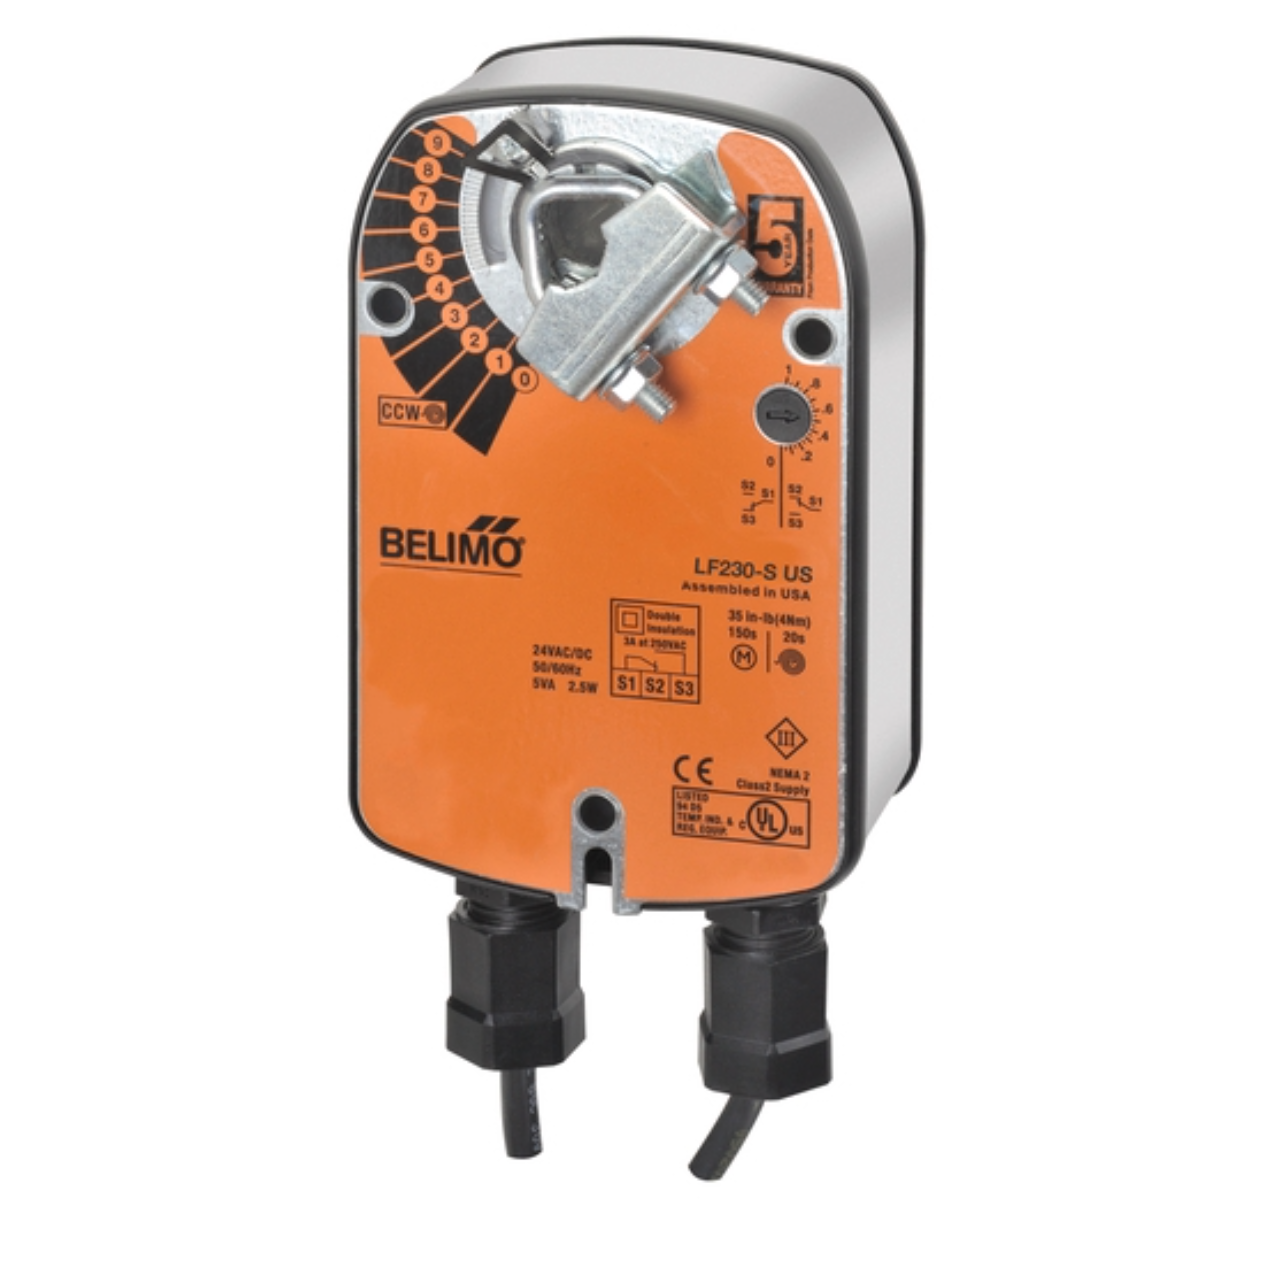 Belimo LF230-S US : Fail-Safe Damper Actuator, 35 in-lb Torque, 230VAC,  On/Off Control Signal, (1) SPDT 3A @250V Aux Switch, 5-Year Warranty